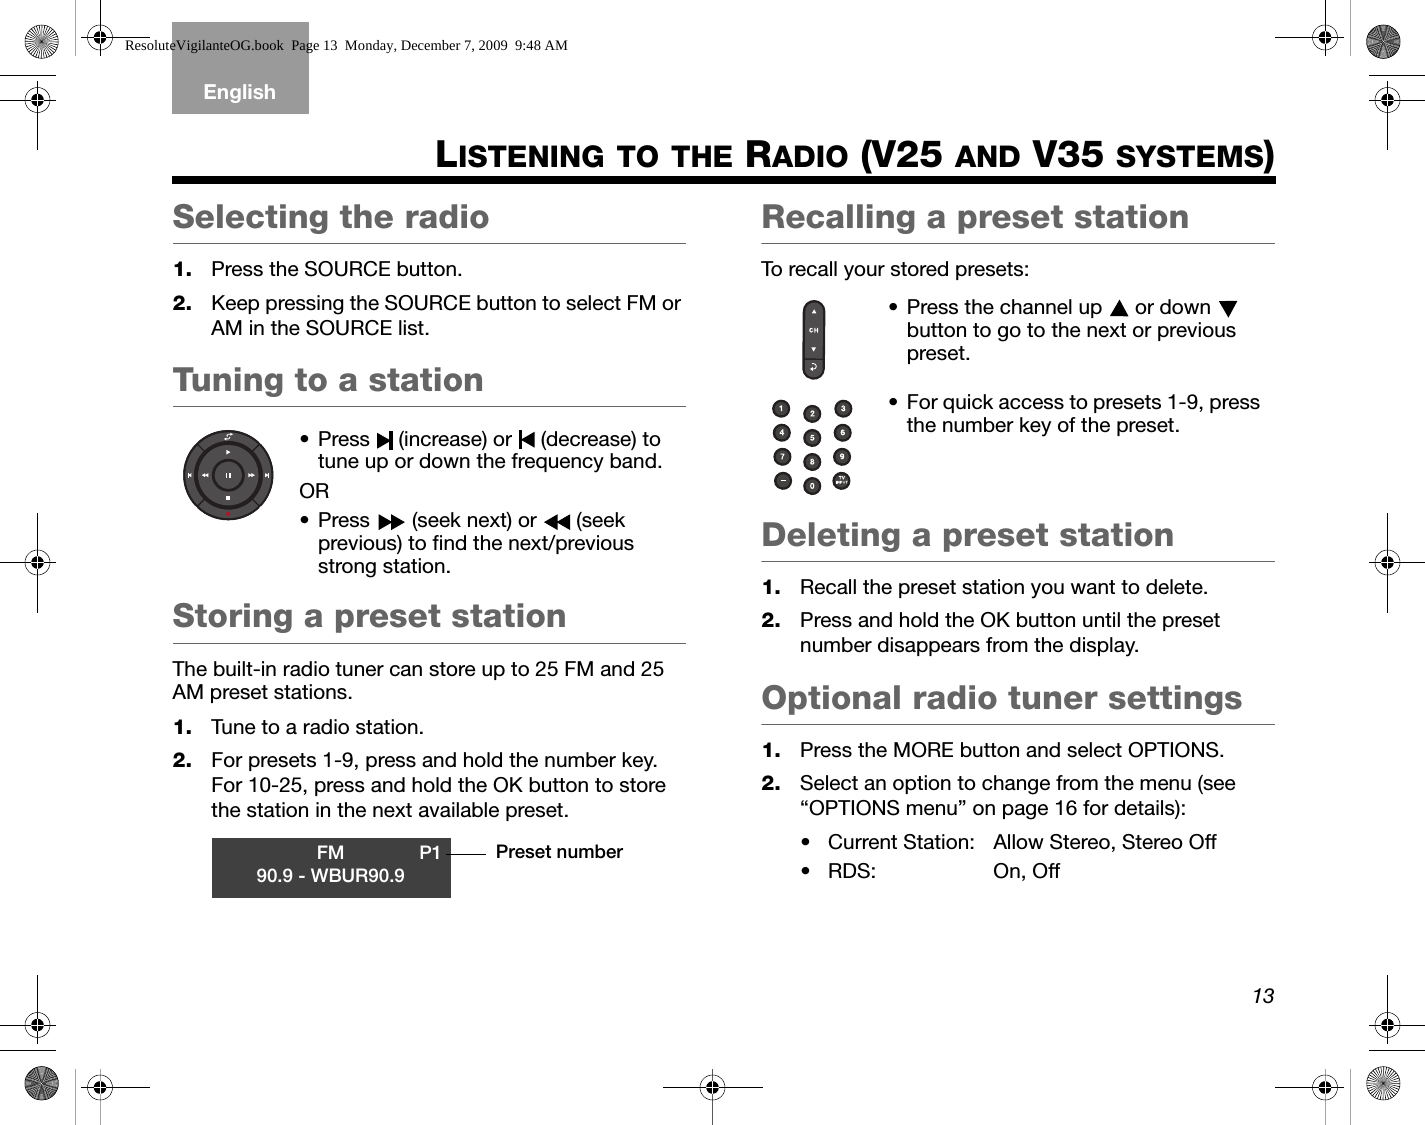 13TAB 5TAB 4TAB 6TAB 8TAB 7English TAB 3TAB 2LISTENING TO THE RADIO (V25 AND V35 SYSTEMS)Selecting the radio1. Press the SOURCE button.2. Keep pressing the SOURCE button to select FM or AM in the SOURCE list.Tuning to a stationStoring a preset stationThe built-in radio tuner can store up to 25 FM and 25 AM preset stations.1. Tune to a radio station.2. For presets 1-9, press and hold the number key. For 10-25, press and hold the OK button to store the station in the next available preset.Recalling a preset stationTo recall your stored presets:Deleting a preset station1. Recall the preset station you want to delete.2. Press and hold the OK button until the preset number disappears from the display.Optional radio tuner settings1. Press the MORE button and select OPTIONS.2. Select an option to change from the menu (see “OPTIONS menu” on page 16 for details):• Current Station: Allow Stereo, Stereo Off•RDS: On, Off• Press   (increase) or   (decrease) to tune up or down the frequency band.OR• Press   (seek next) or   (seek previous) to find the next/previous strong station.FM P190.9 - WBUR90.9Preset number• Press the channel up   or down   button to go to the next or previous preset.• For quick access to presets 1-9, press the number key of the preset.ResoluteVigilanteOG.book  Page 13  Monday, December 7, 2009  9:48 AM